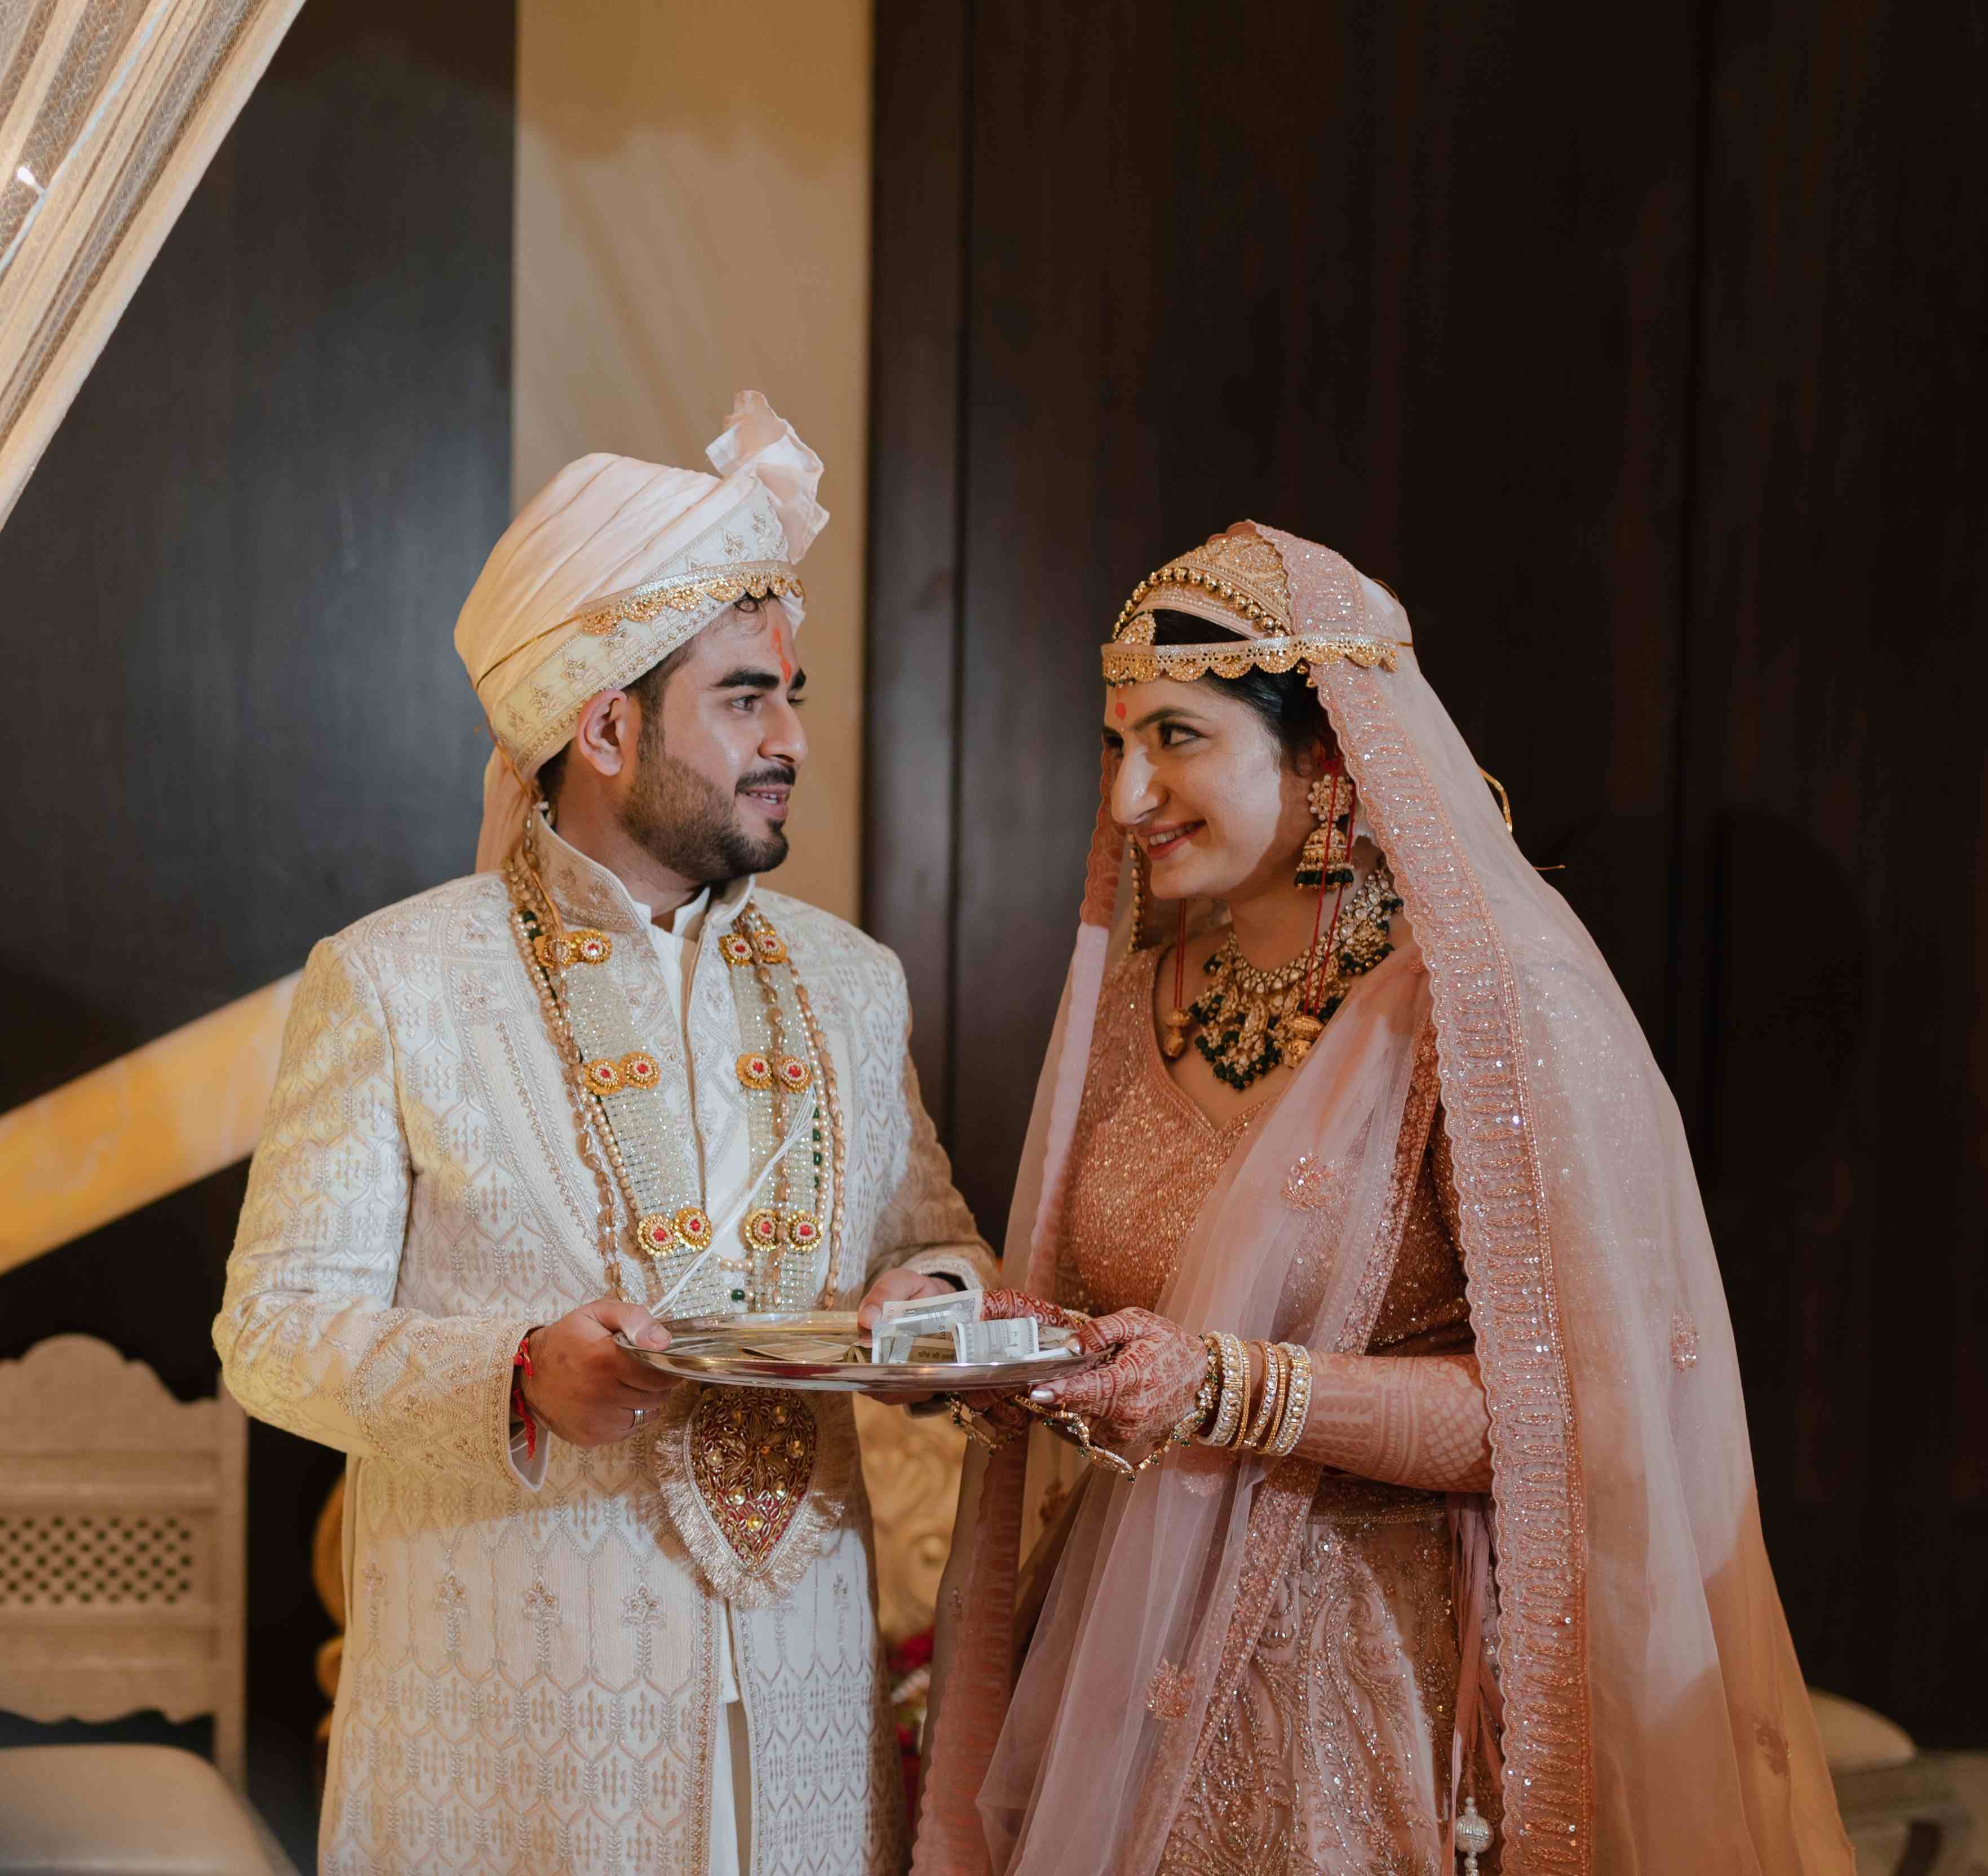 Know About All The Beautiful Kashmiri Traditions With This Couple’s Wedding